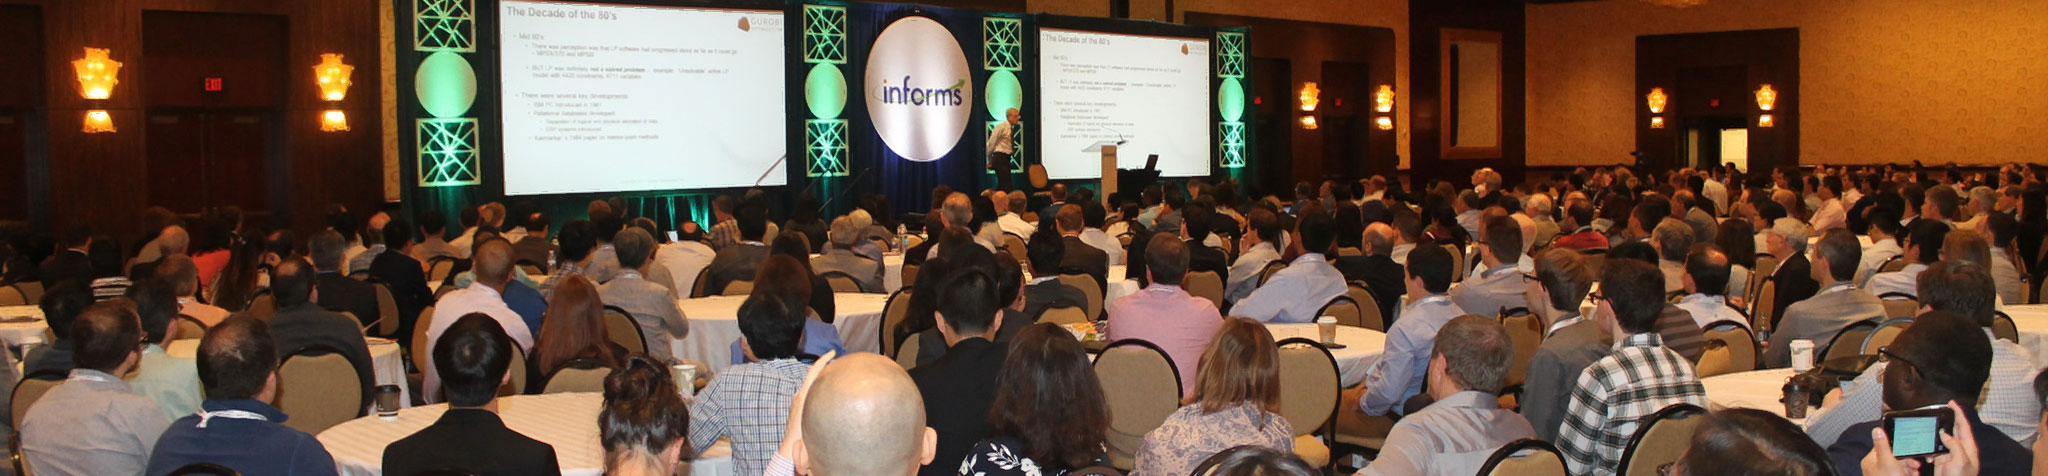 The 2019 INFORMS Annual Meeting is a unique opportunity to connect and network with the more than 6,000 INFORMS members, students, prospective employers and employees, and academic and industry experts who compose the INFORMS community. We look forward to seeing you in Seattle, WA, October 20-23, 2019!